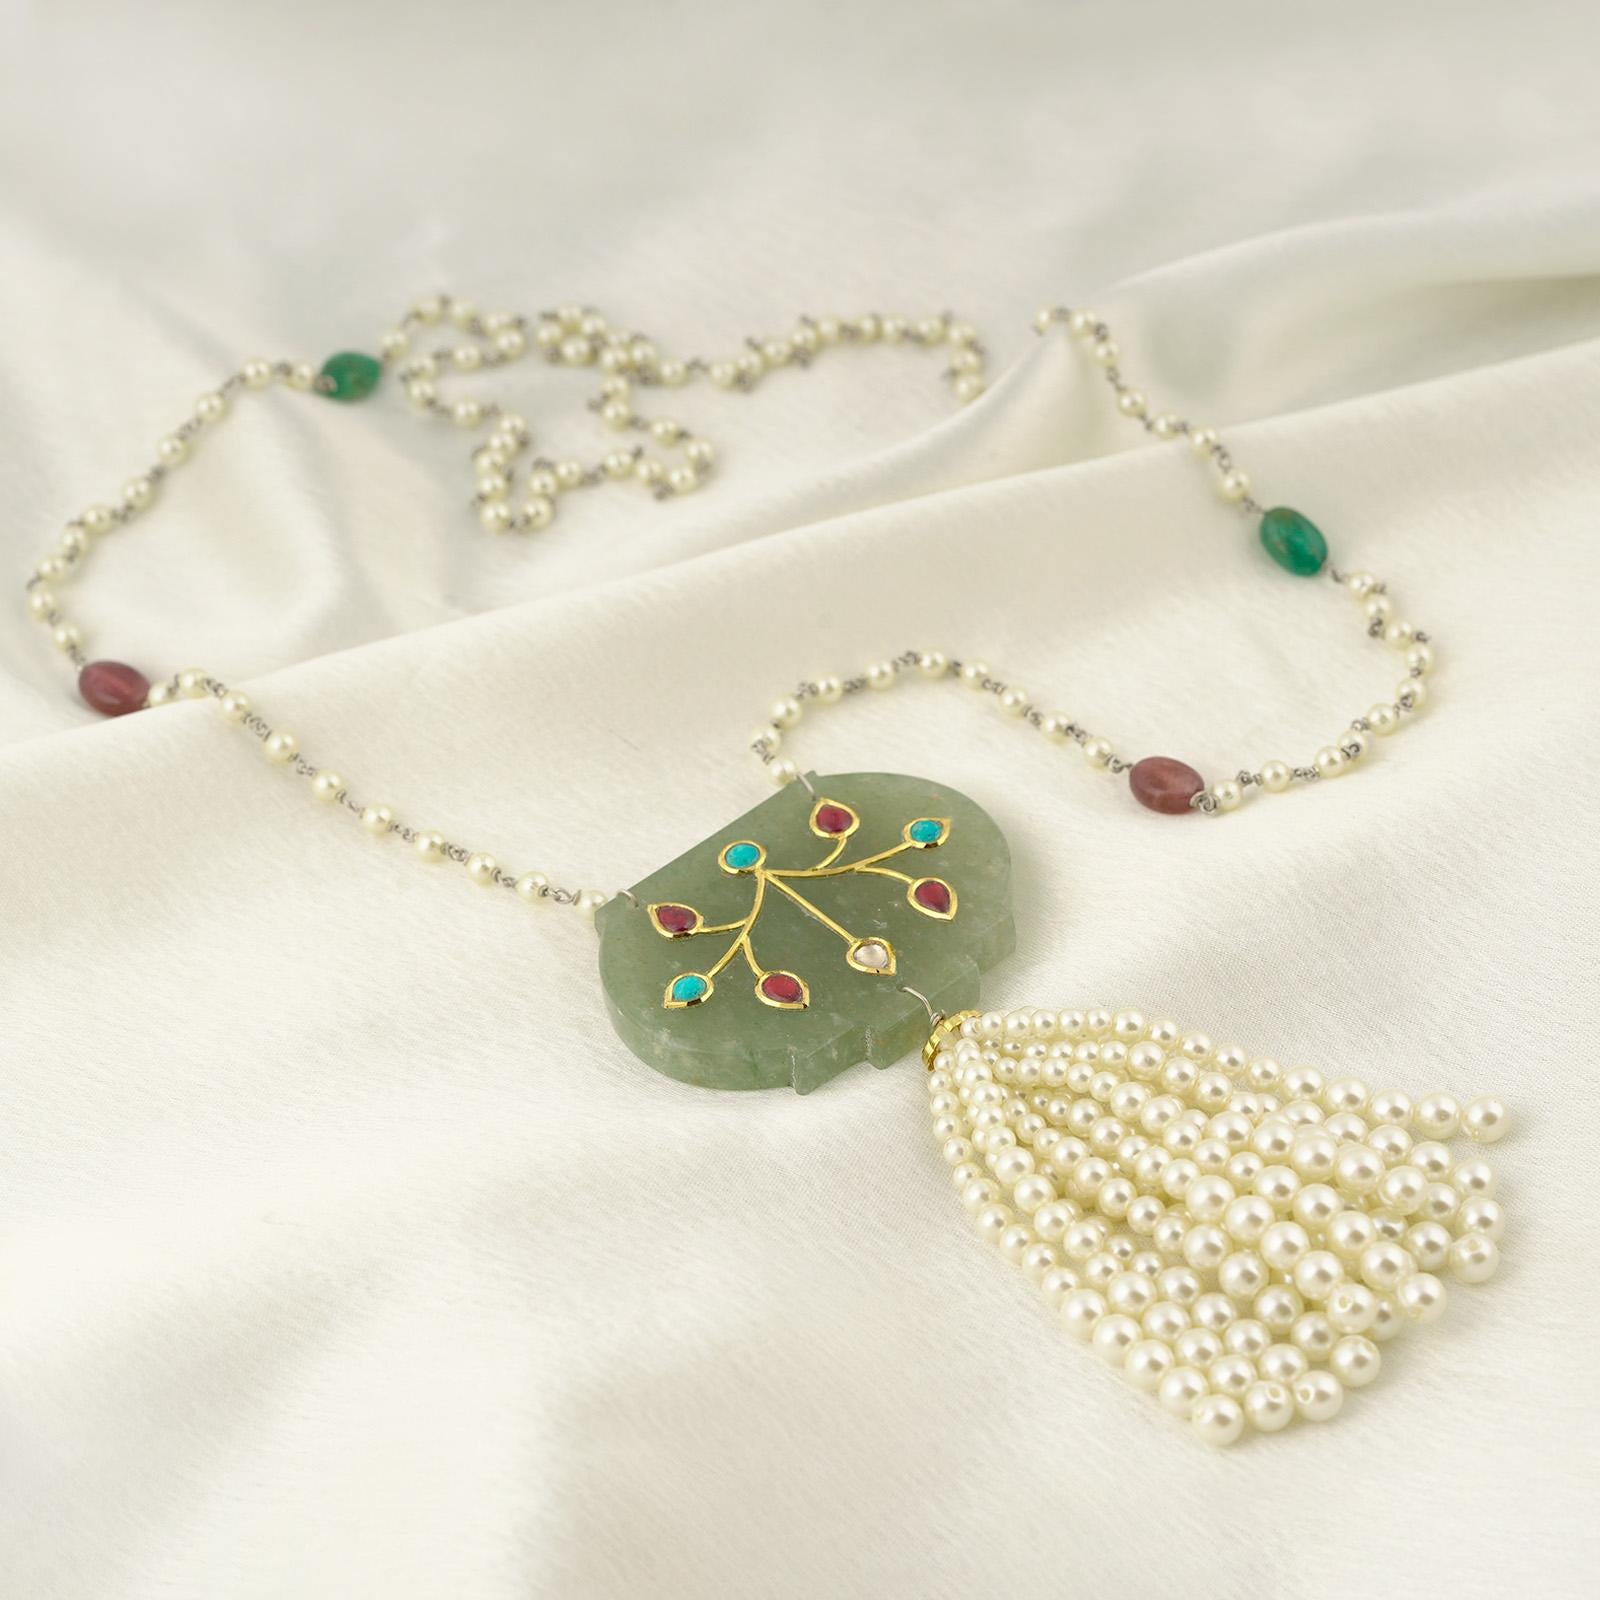 Gold(22K) : 1.53g
Gemstones : Ruby, Turquoise, Adventurine, Shell Pearls, Emerald
The chain is worked in a 925 silver.

Inspired from the ornate 'Haldili' or amulets prevalent with the Mughals, this is our minimal take on the style. The Adventurine